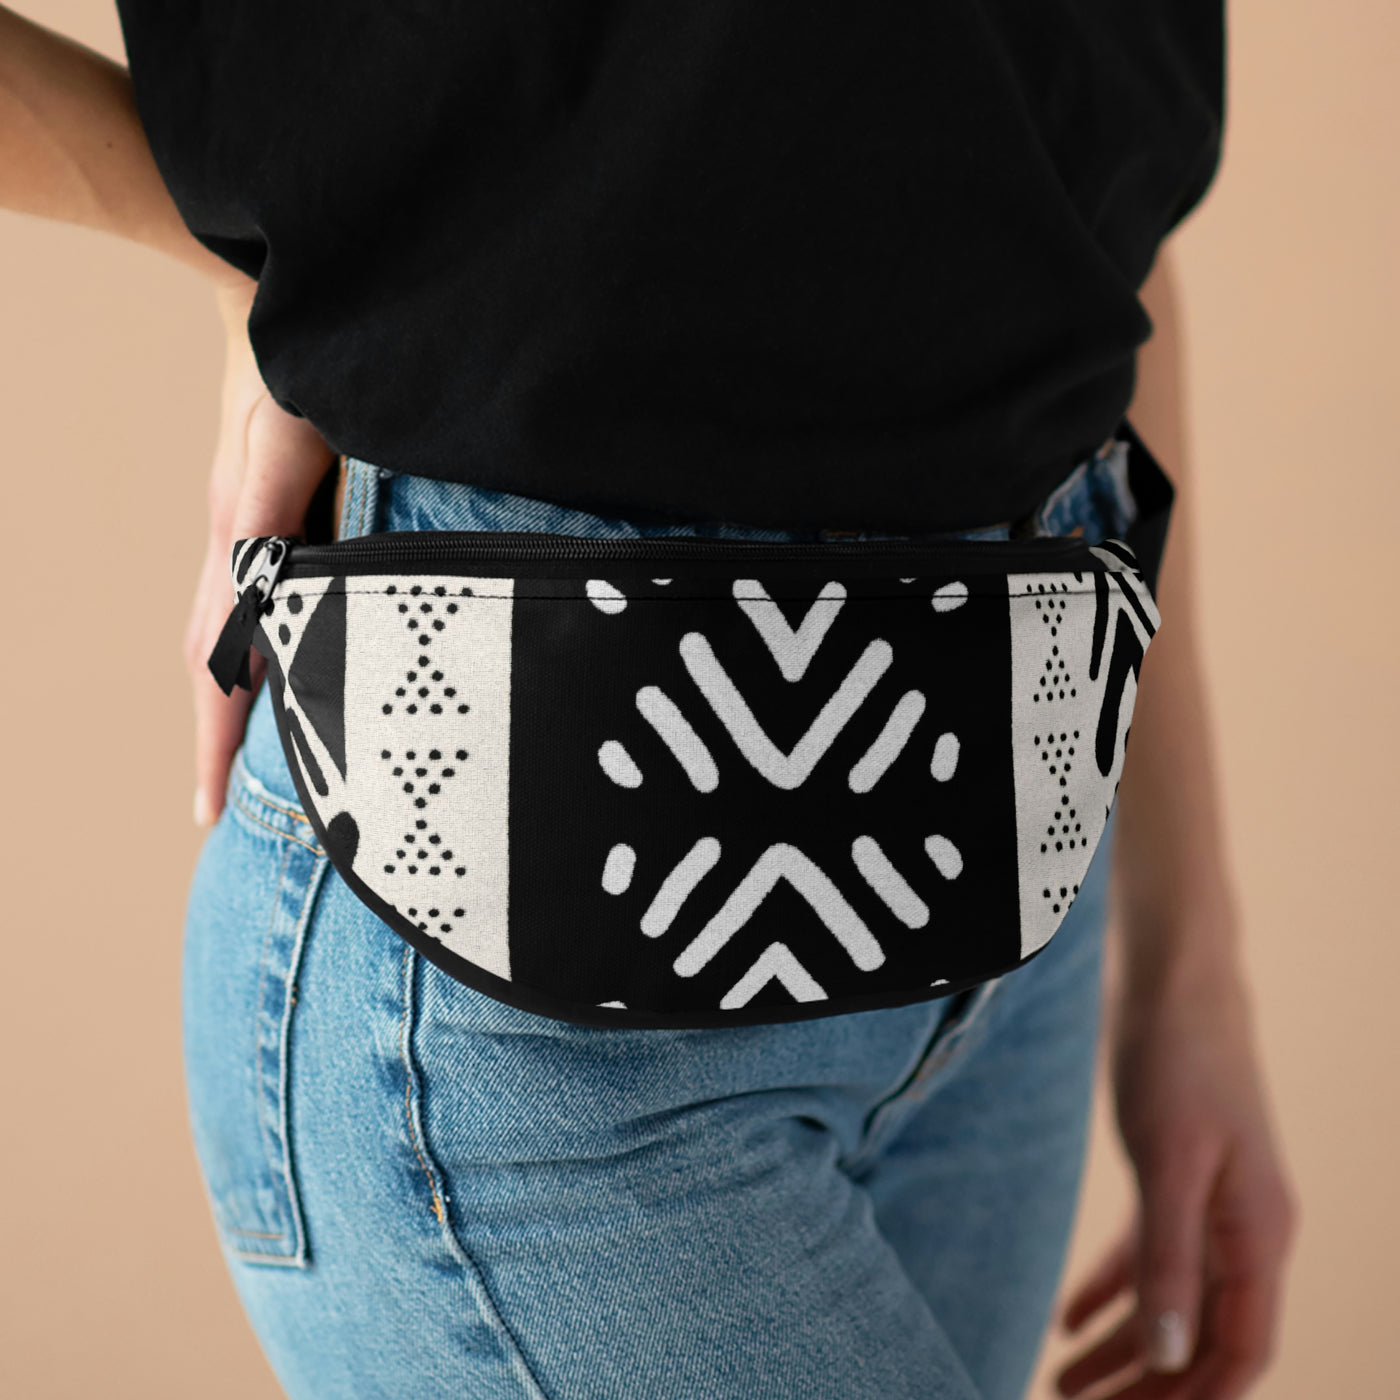 Mudcloth Black and White and Black Fanny Pack